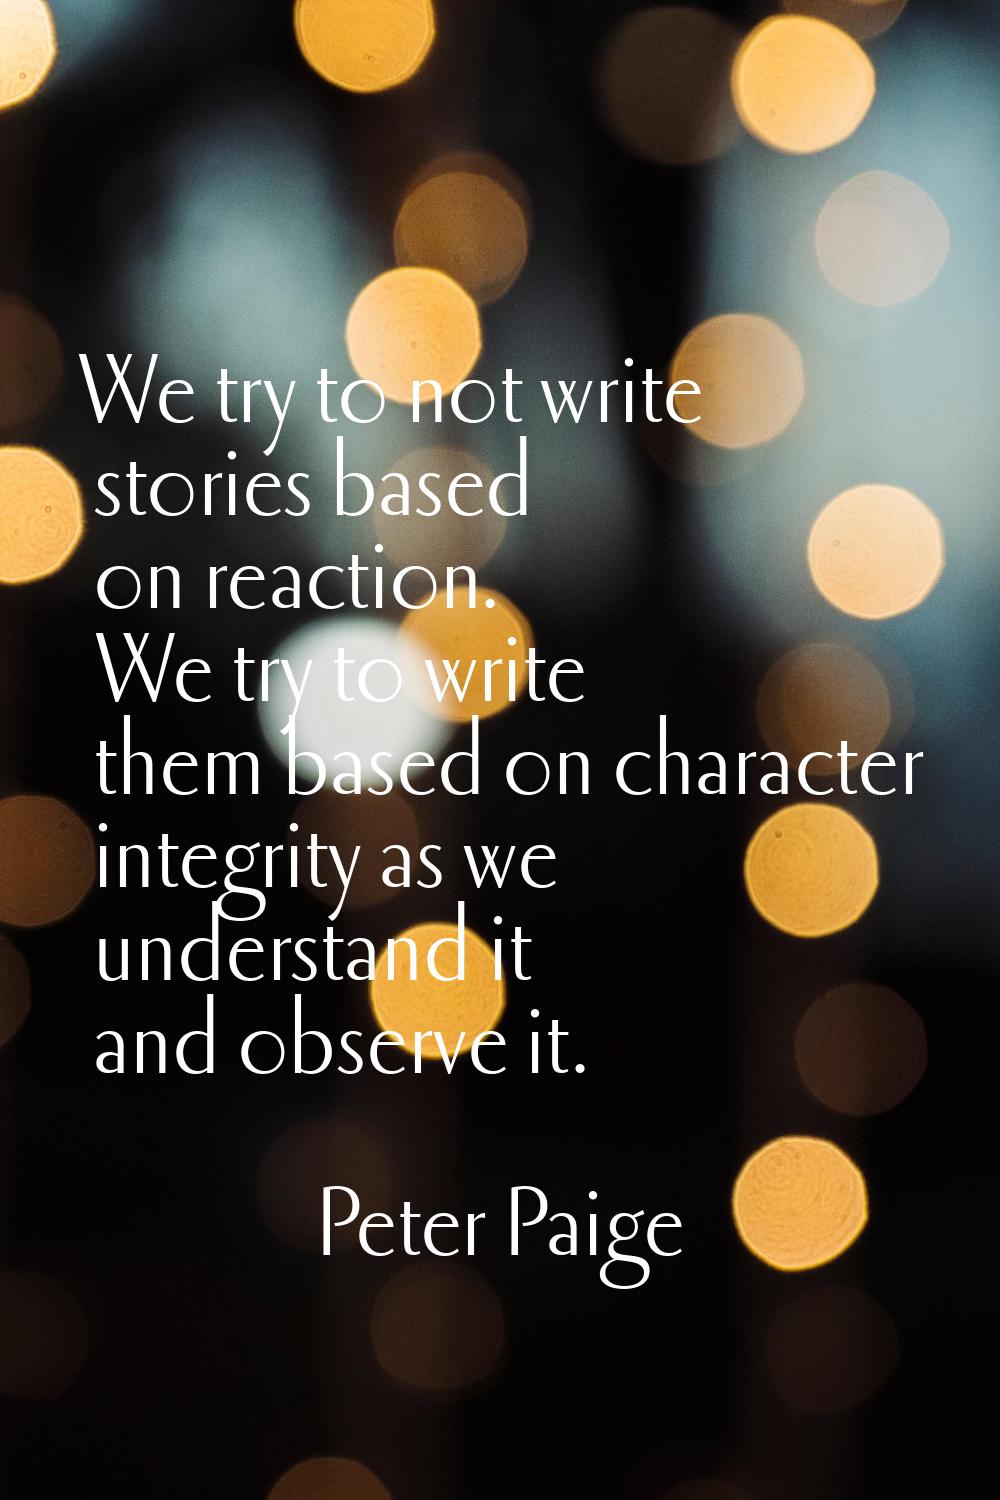 We try to not write stories based on reaction. We try to write them based on character integrity as